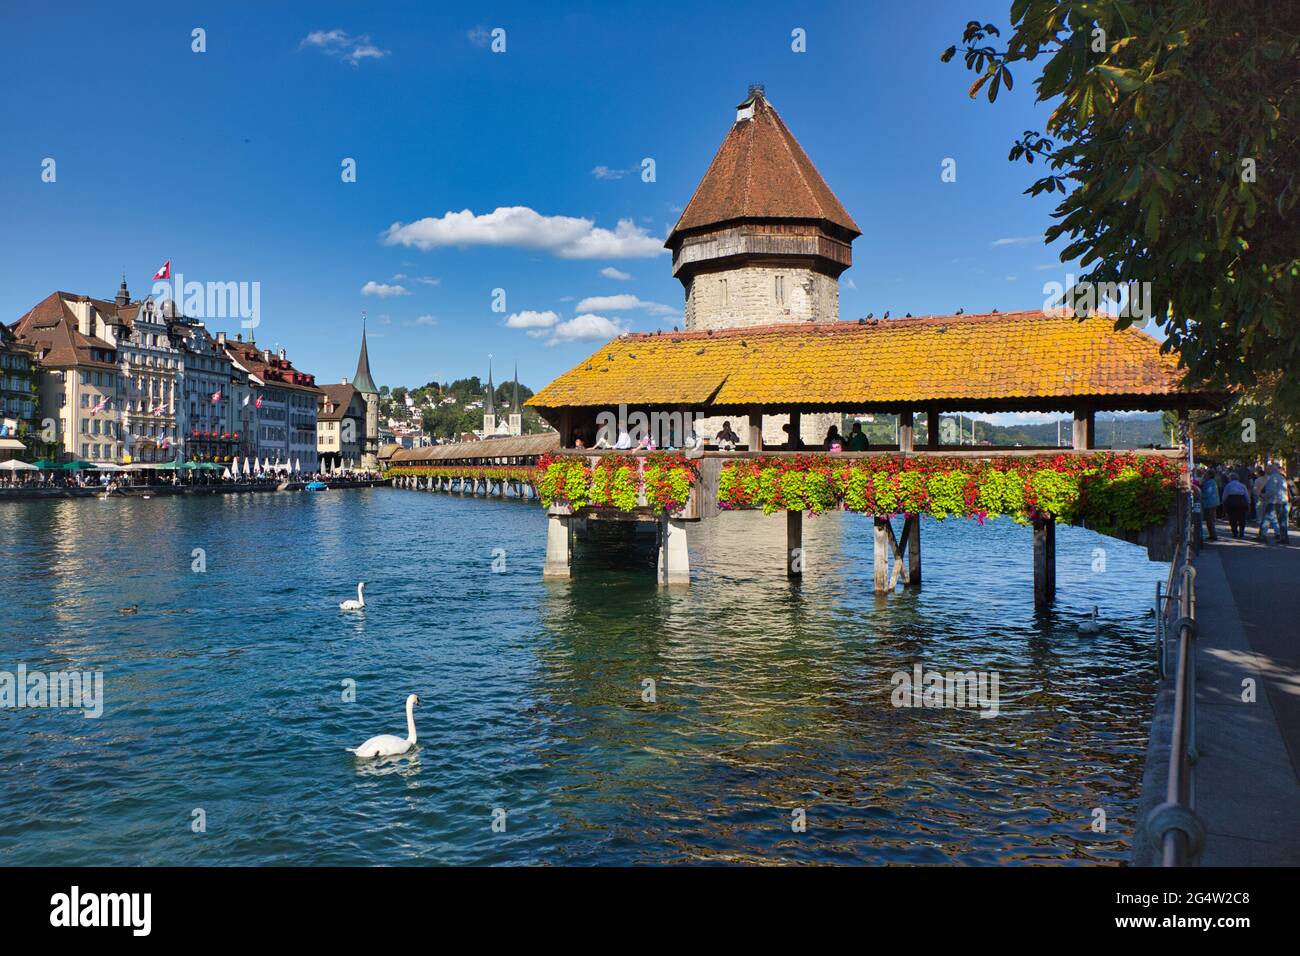 The famous wooden, covered Chapel Bridge and water tower in Lucern, with two swans swimming in the foreground, Switzerland Stock Photo